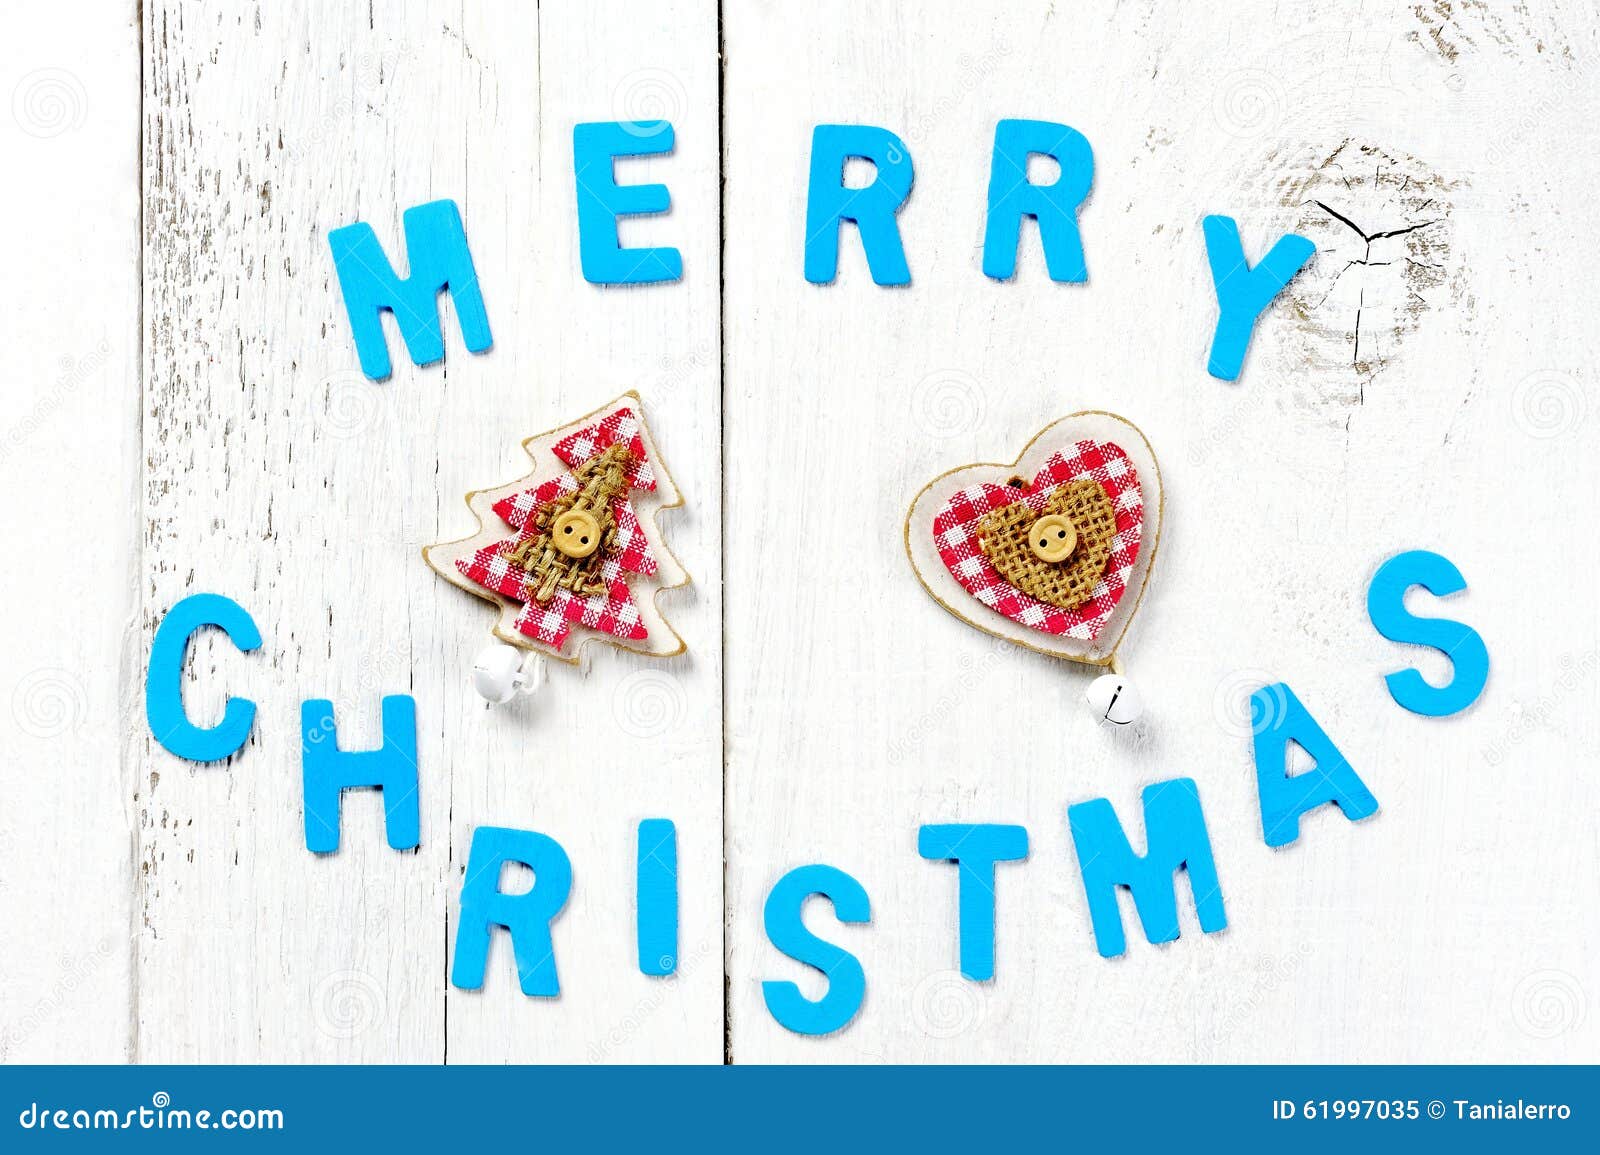 Merry Christmas Words and Decoration on Wooden Background Stock Image